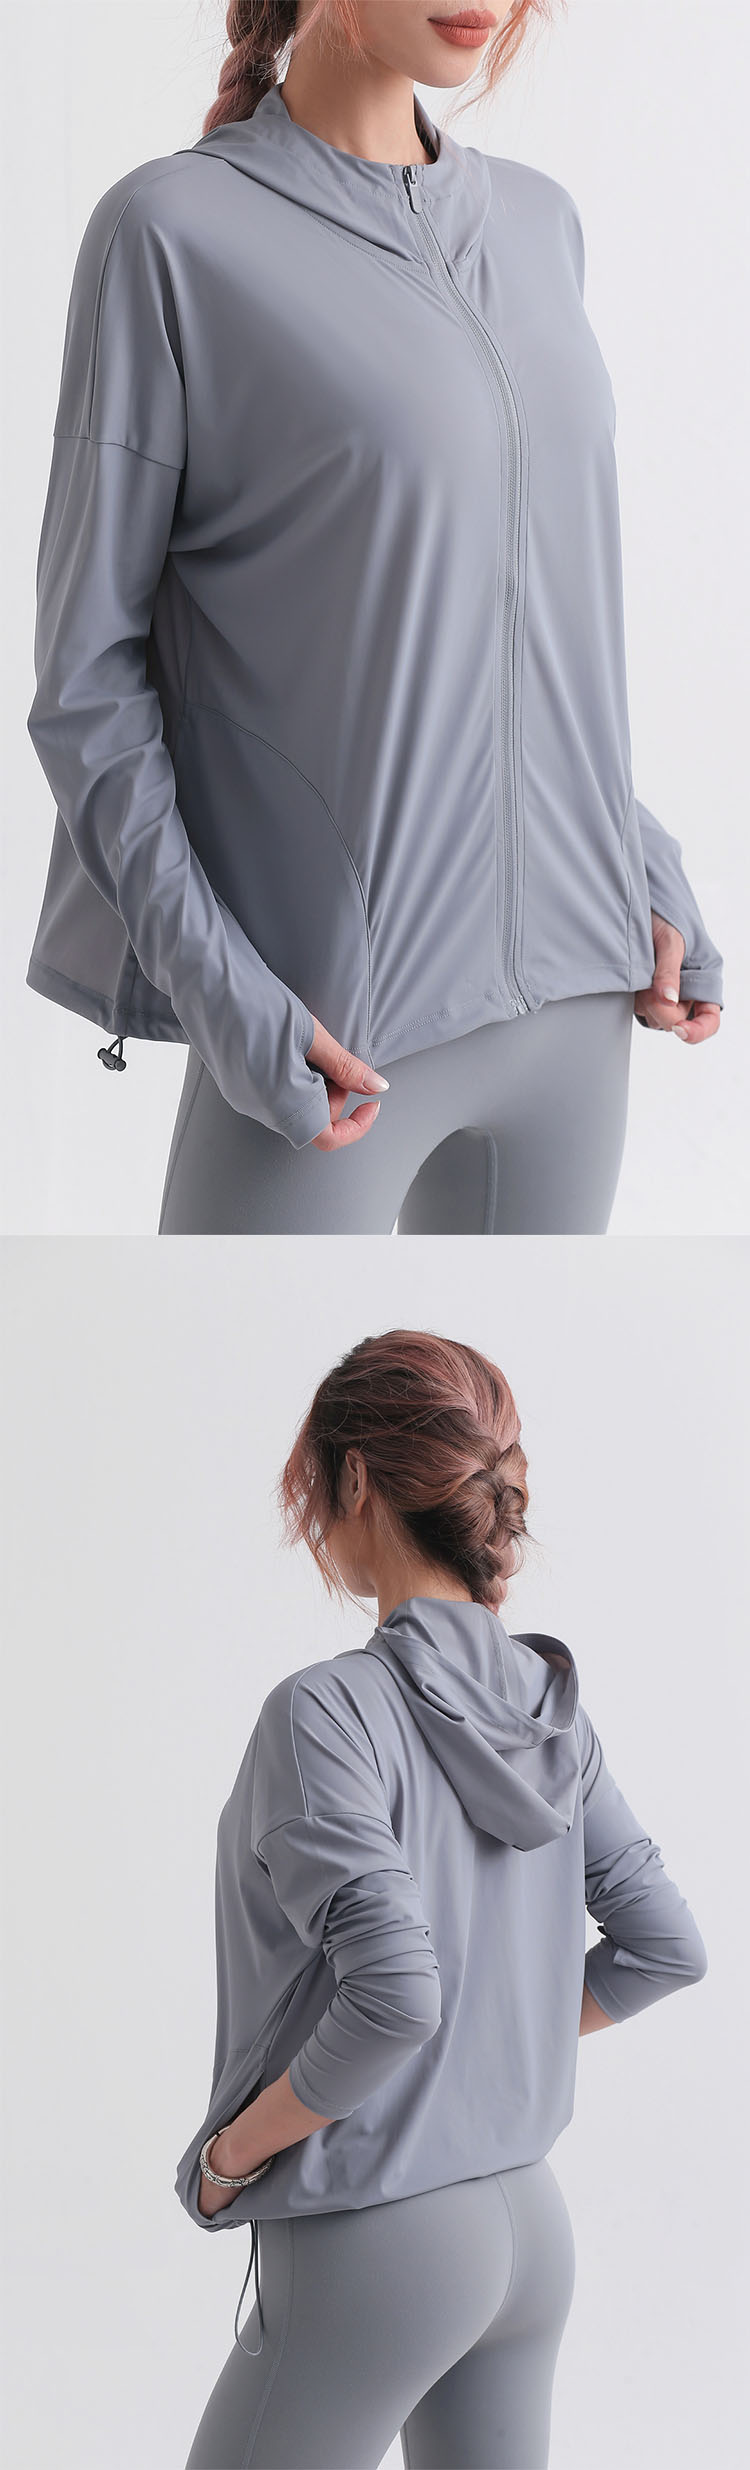 The zipper design is convenient to put on and take off